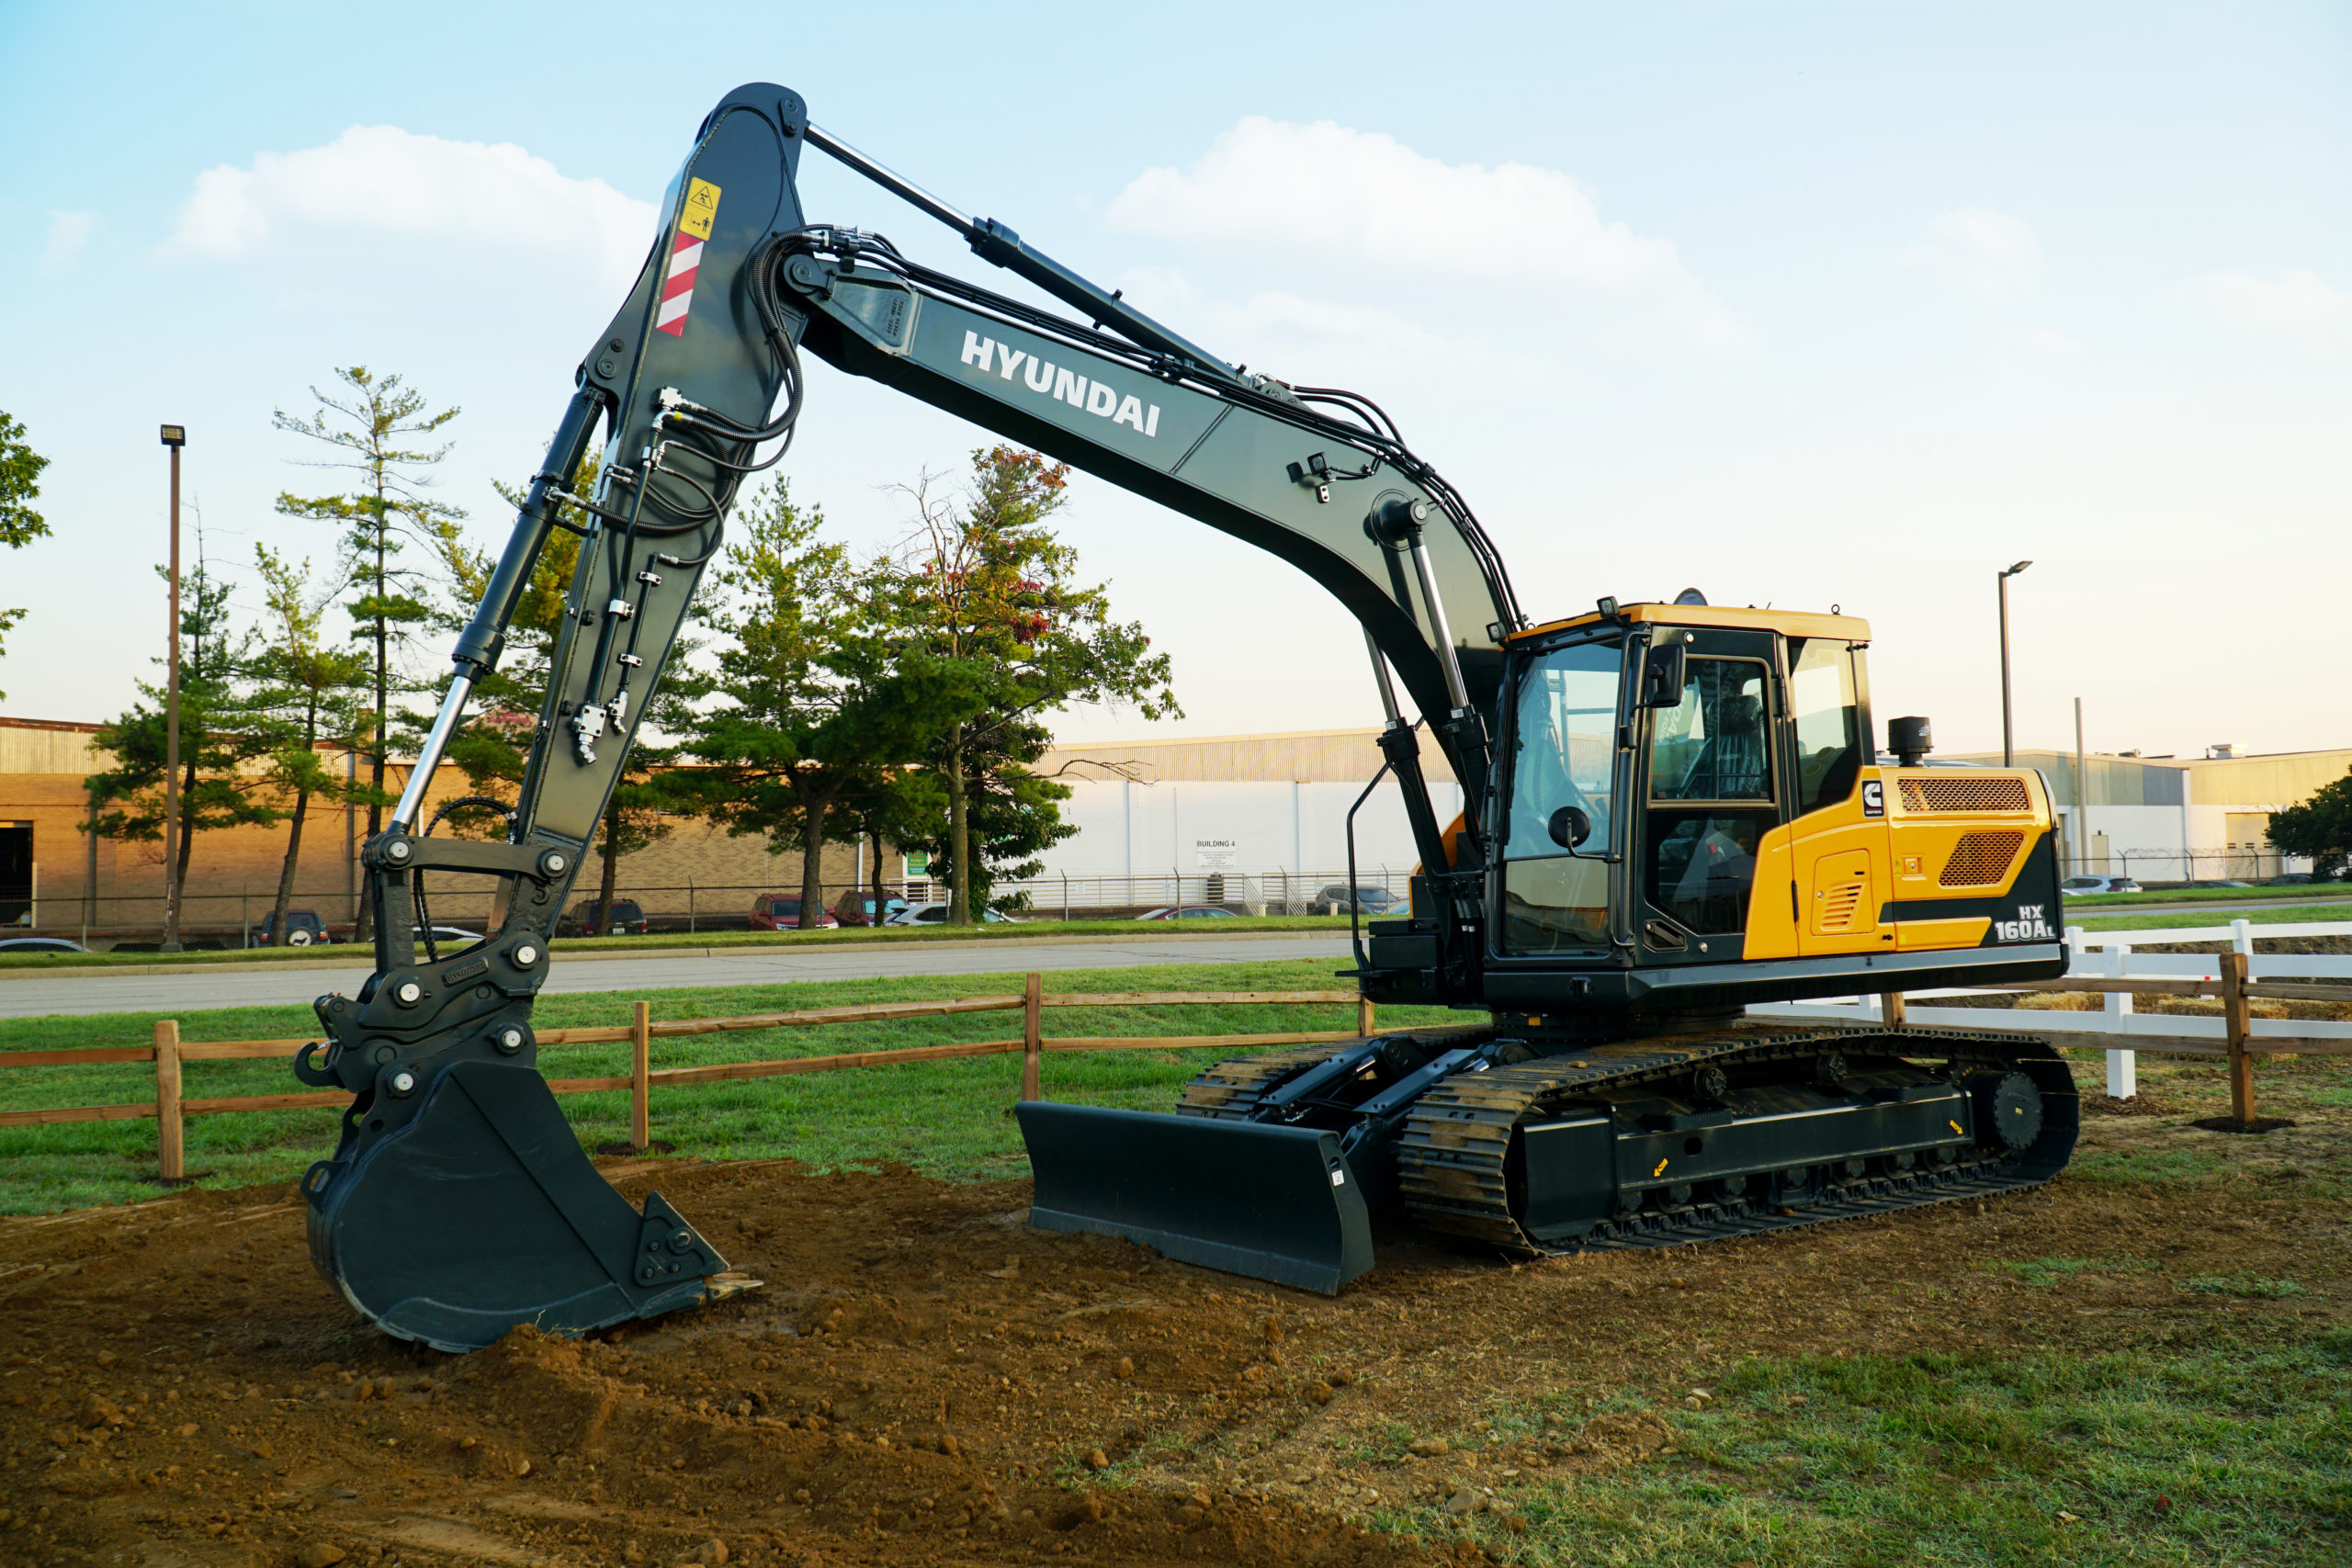 Hyundai Construction Equipment Showcases New A-Series HX160AL Excavator During The Utility Expo